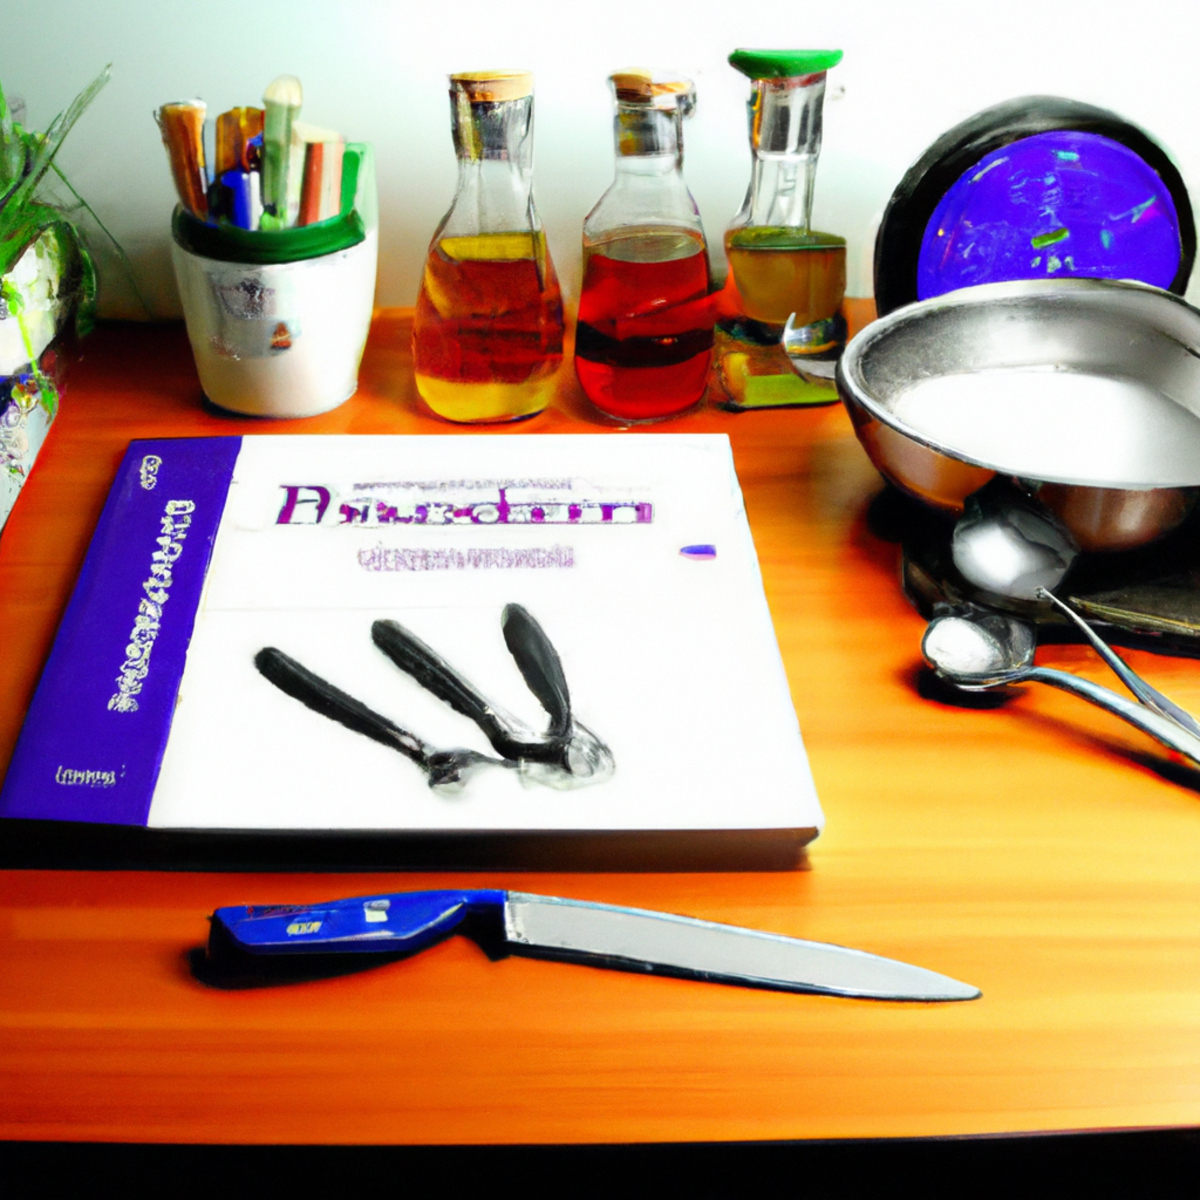 Well-organized kitchen counter with utensils, cookbook, and recipe page, representing coping strategies for living with Annular Pancreas.